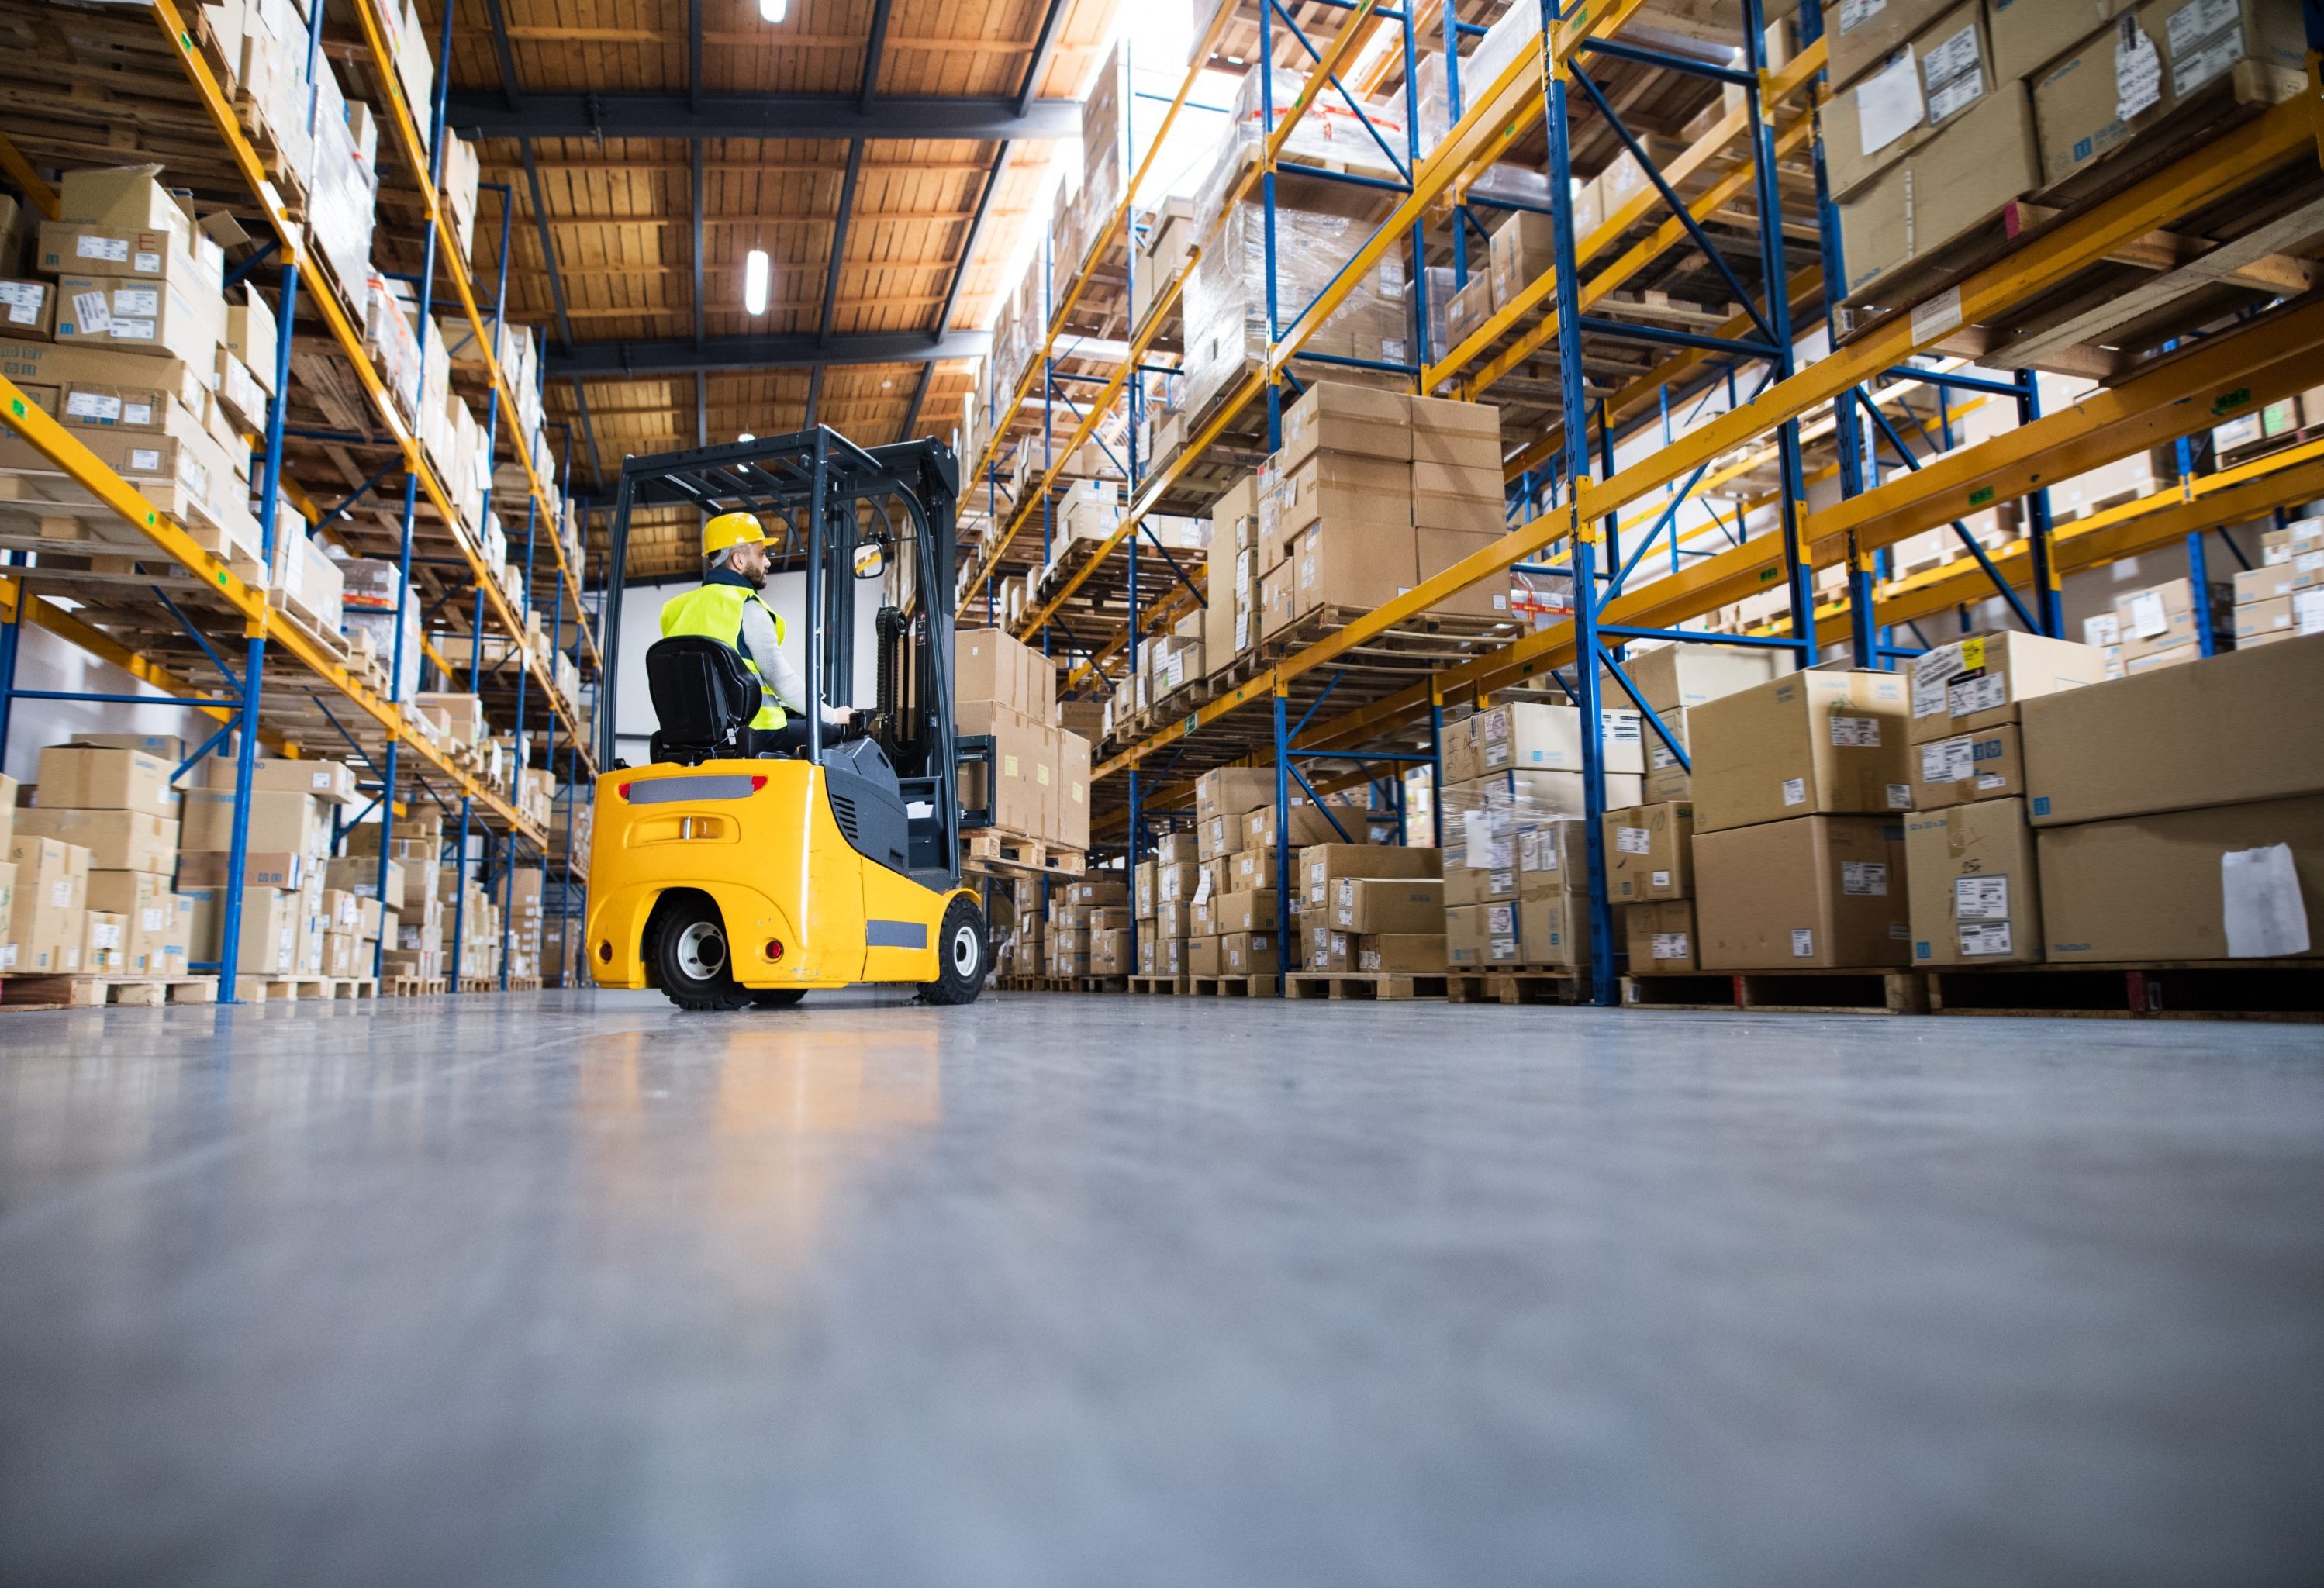 Forklift Driver Recruitment Agency worker. Highreach Forlift Driver in warehouse picking boxes.